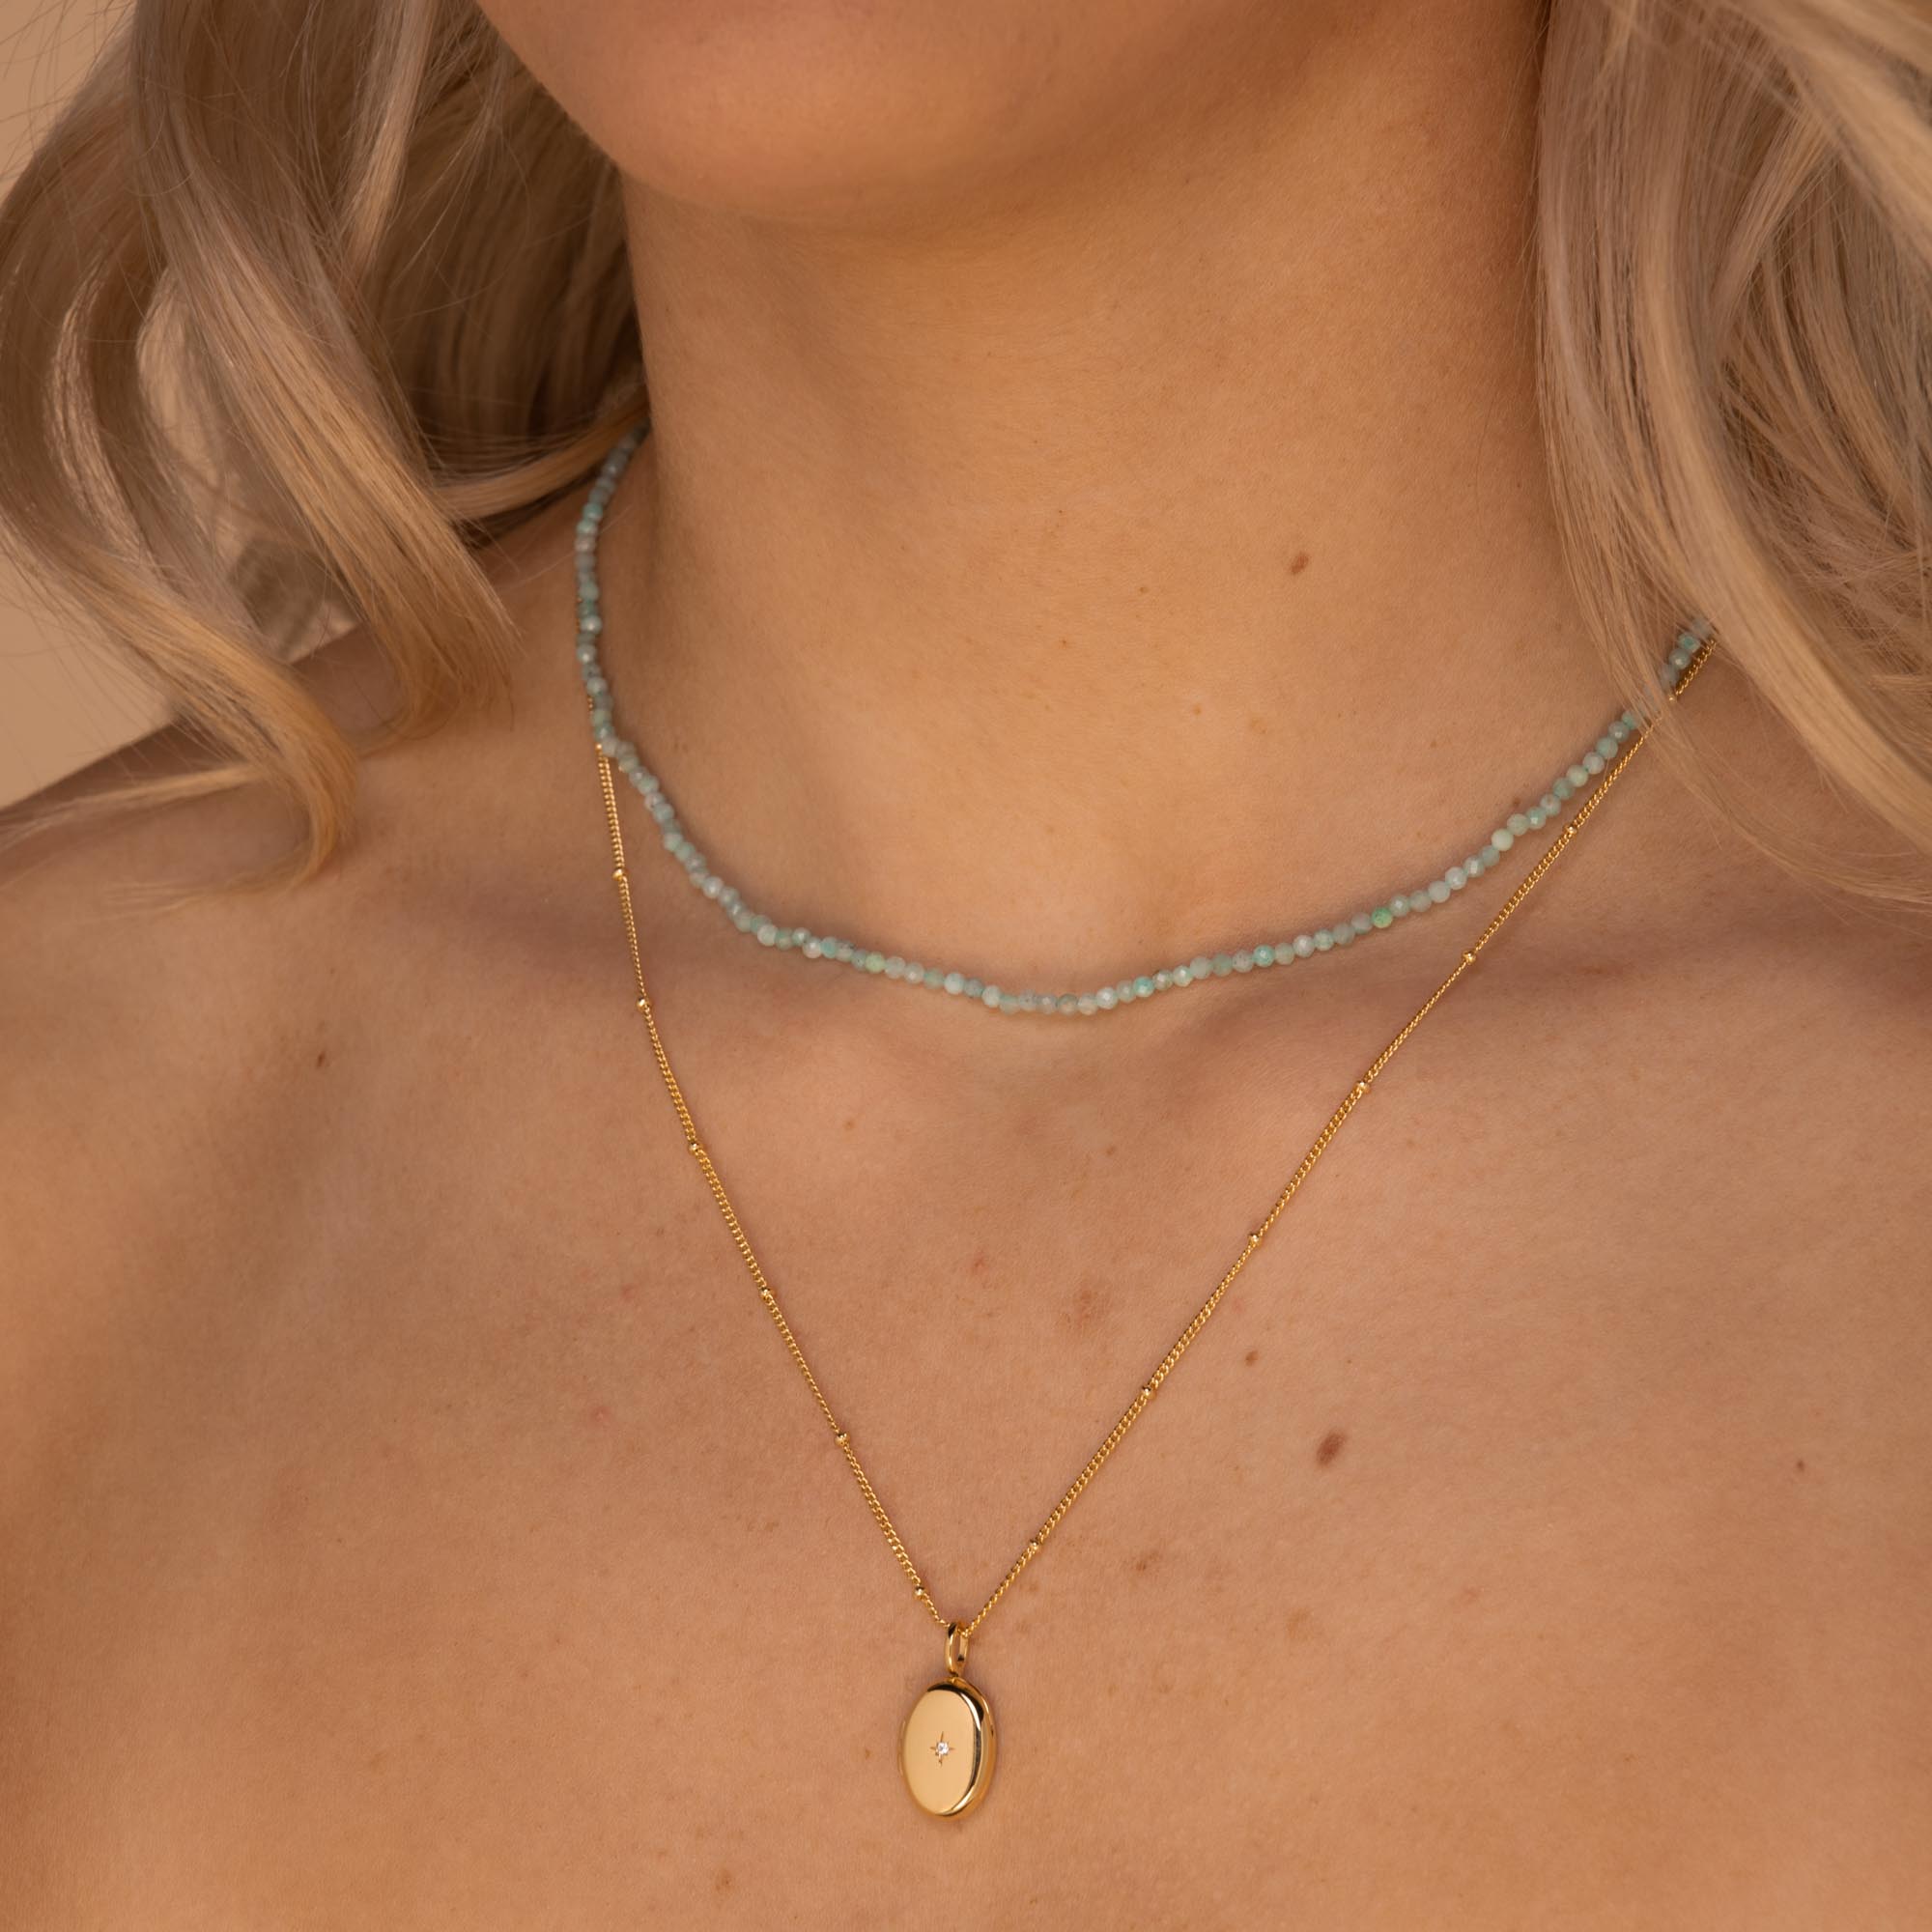 North Star Oval Locket Necklace Gold